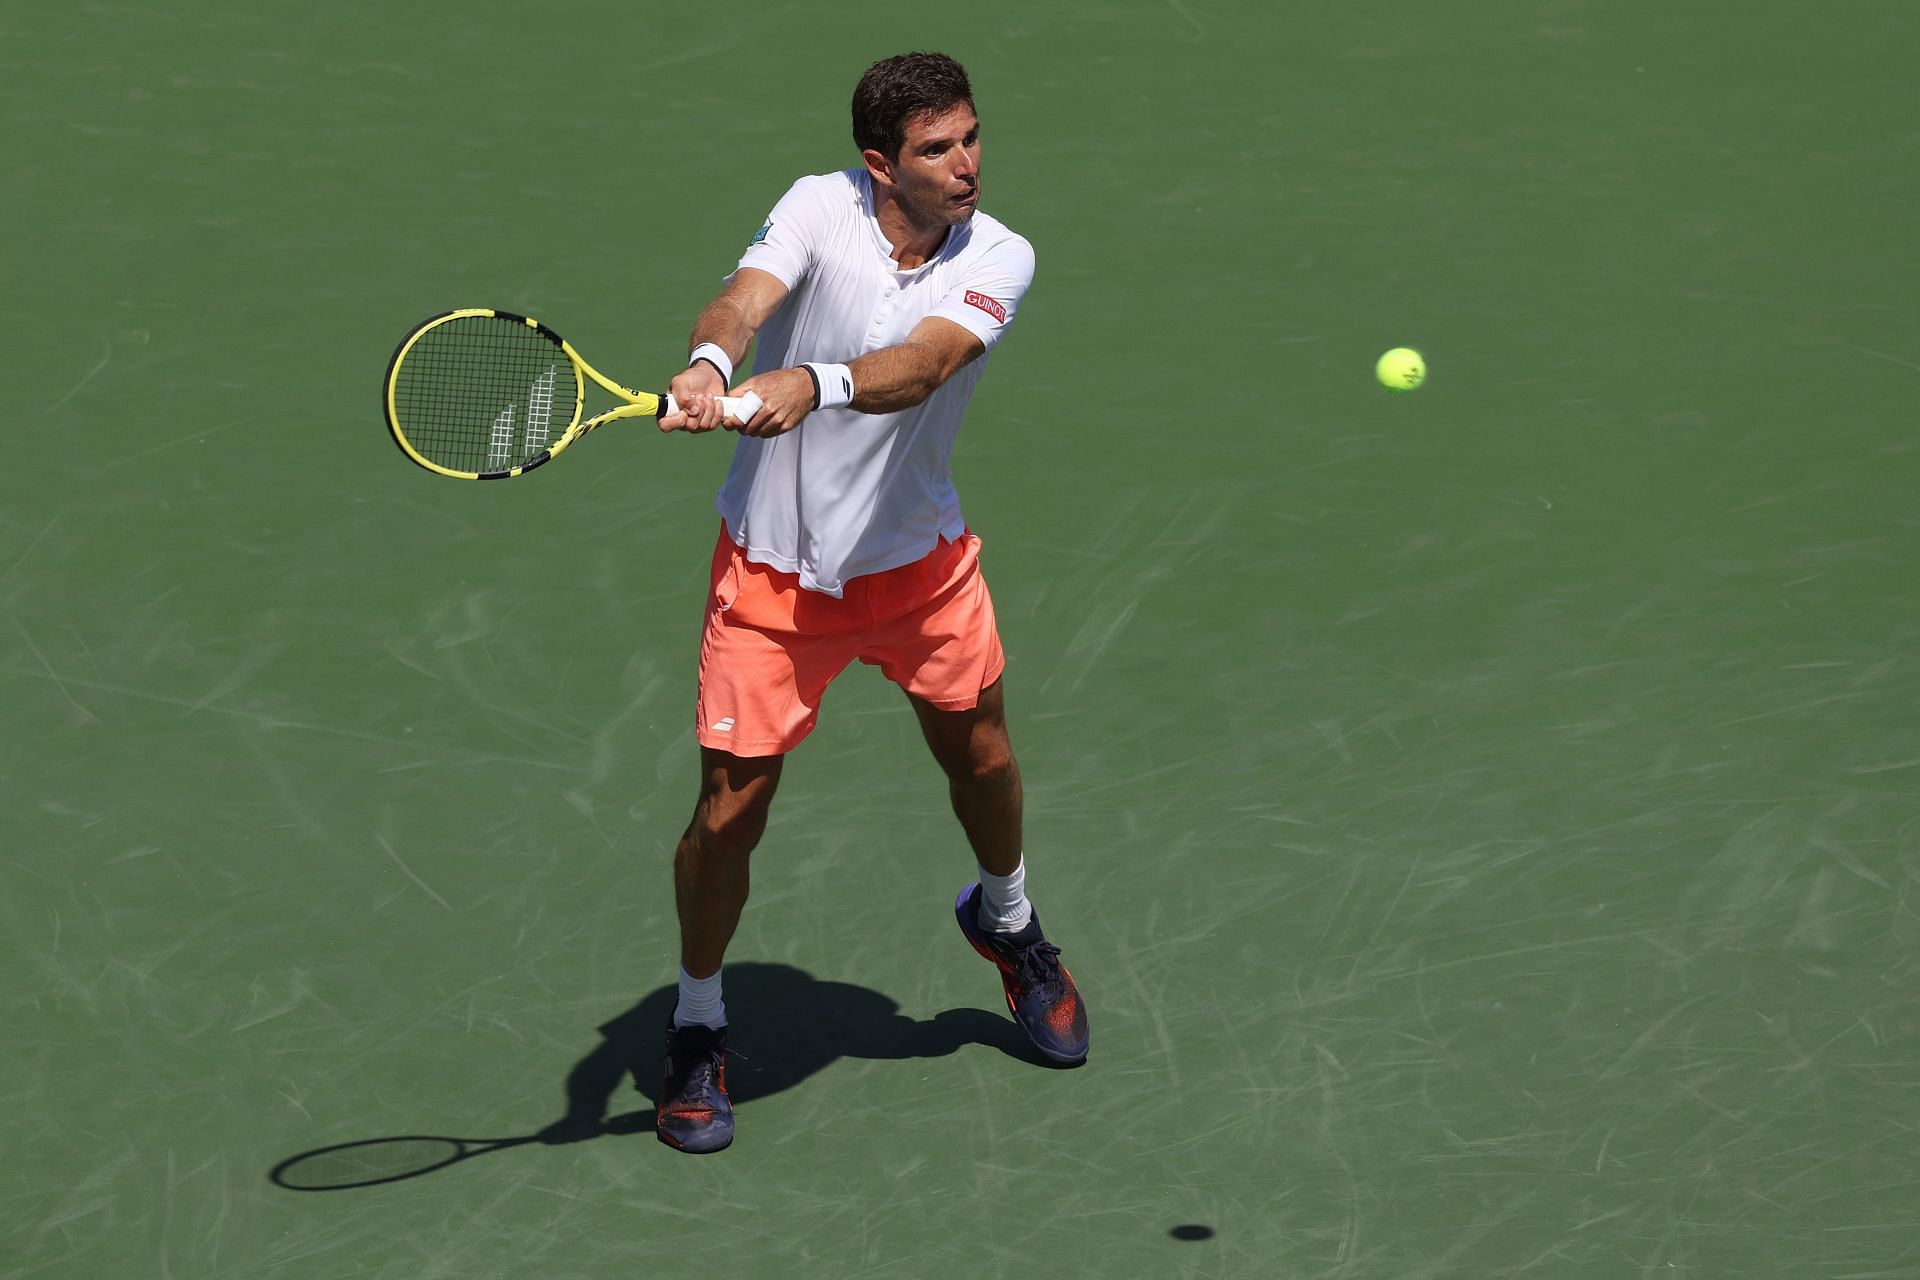 Federico Delbonis at the 2022 US Open - Day 2